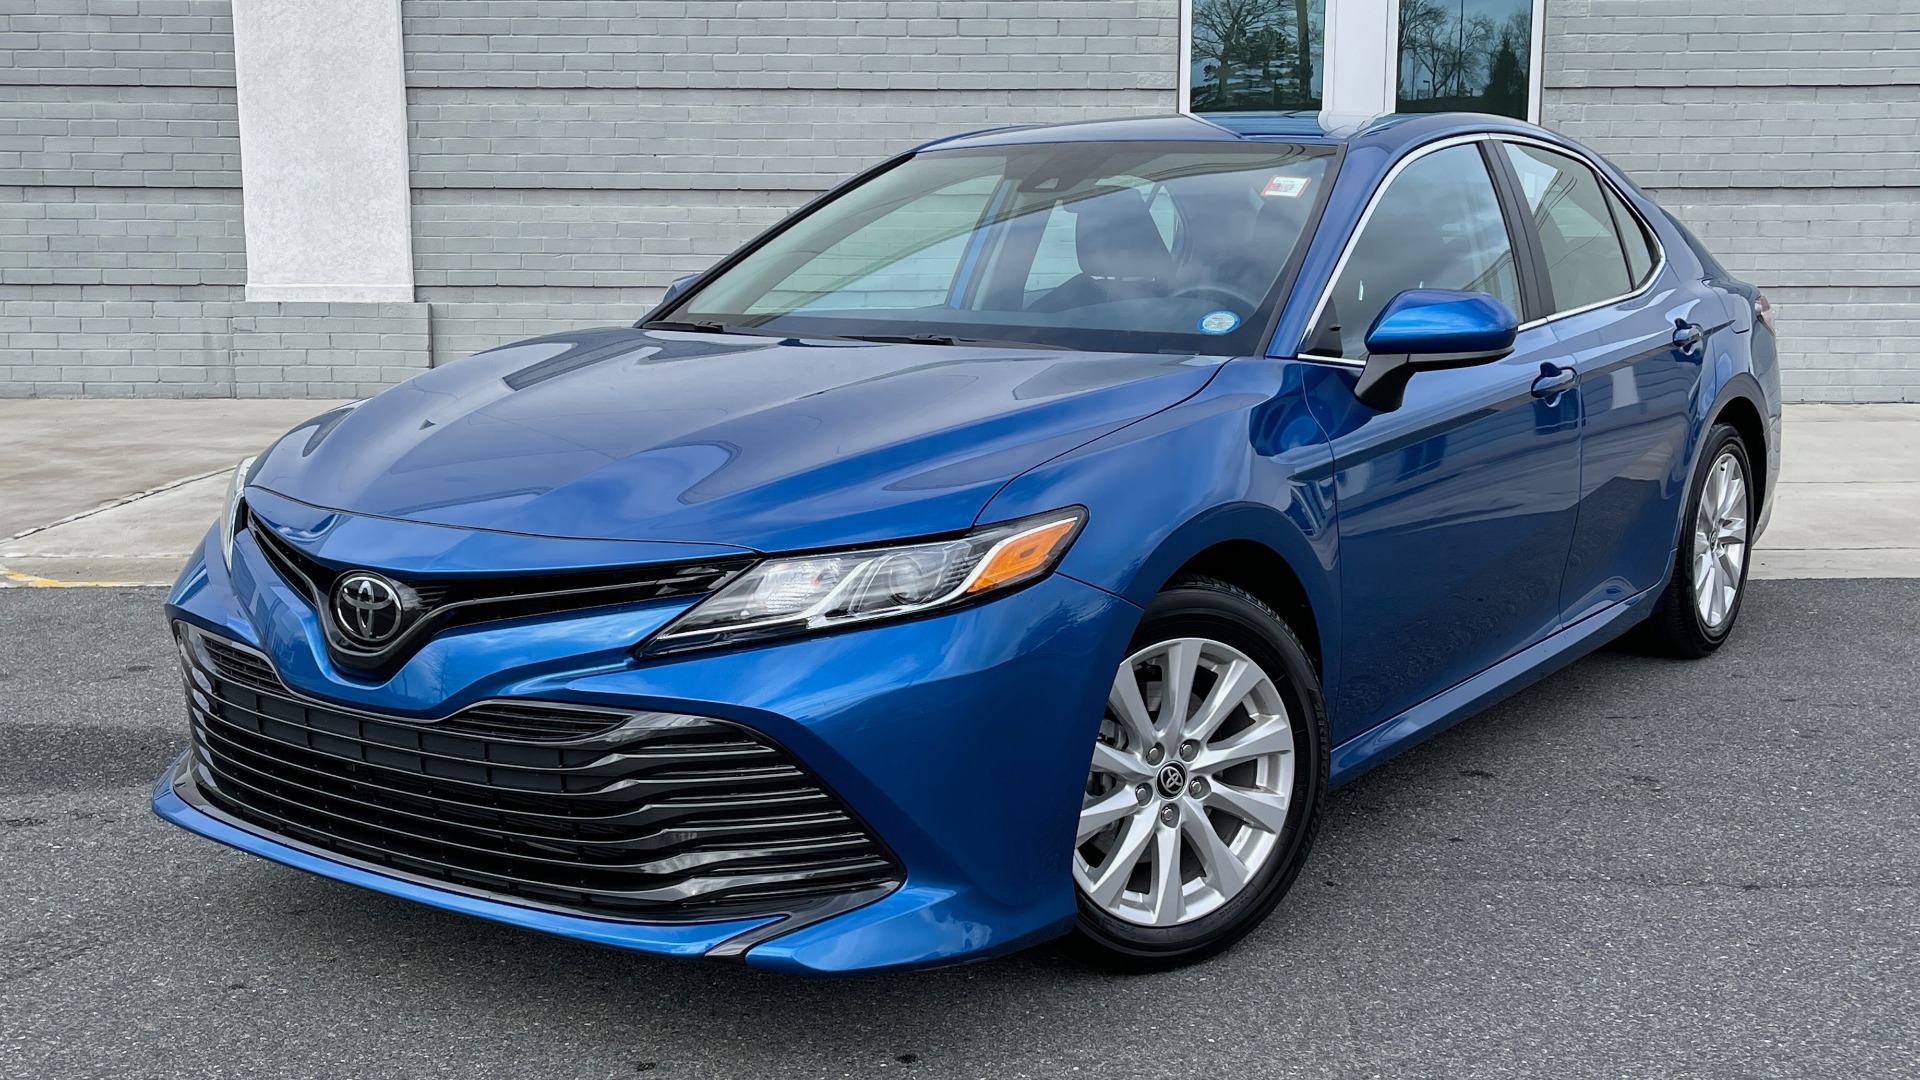 Used 2020 Toyota CAMRY LE 2.5L SEDAN / 8-SPD AUTO / FWD / 17-INCH ALLOY WHEELS for sale Sold at Formula Imports in Charlotte NC 28227 1